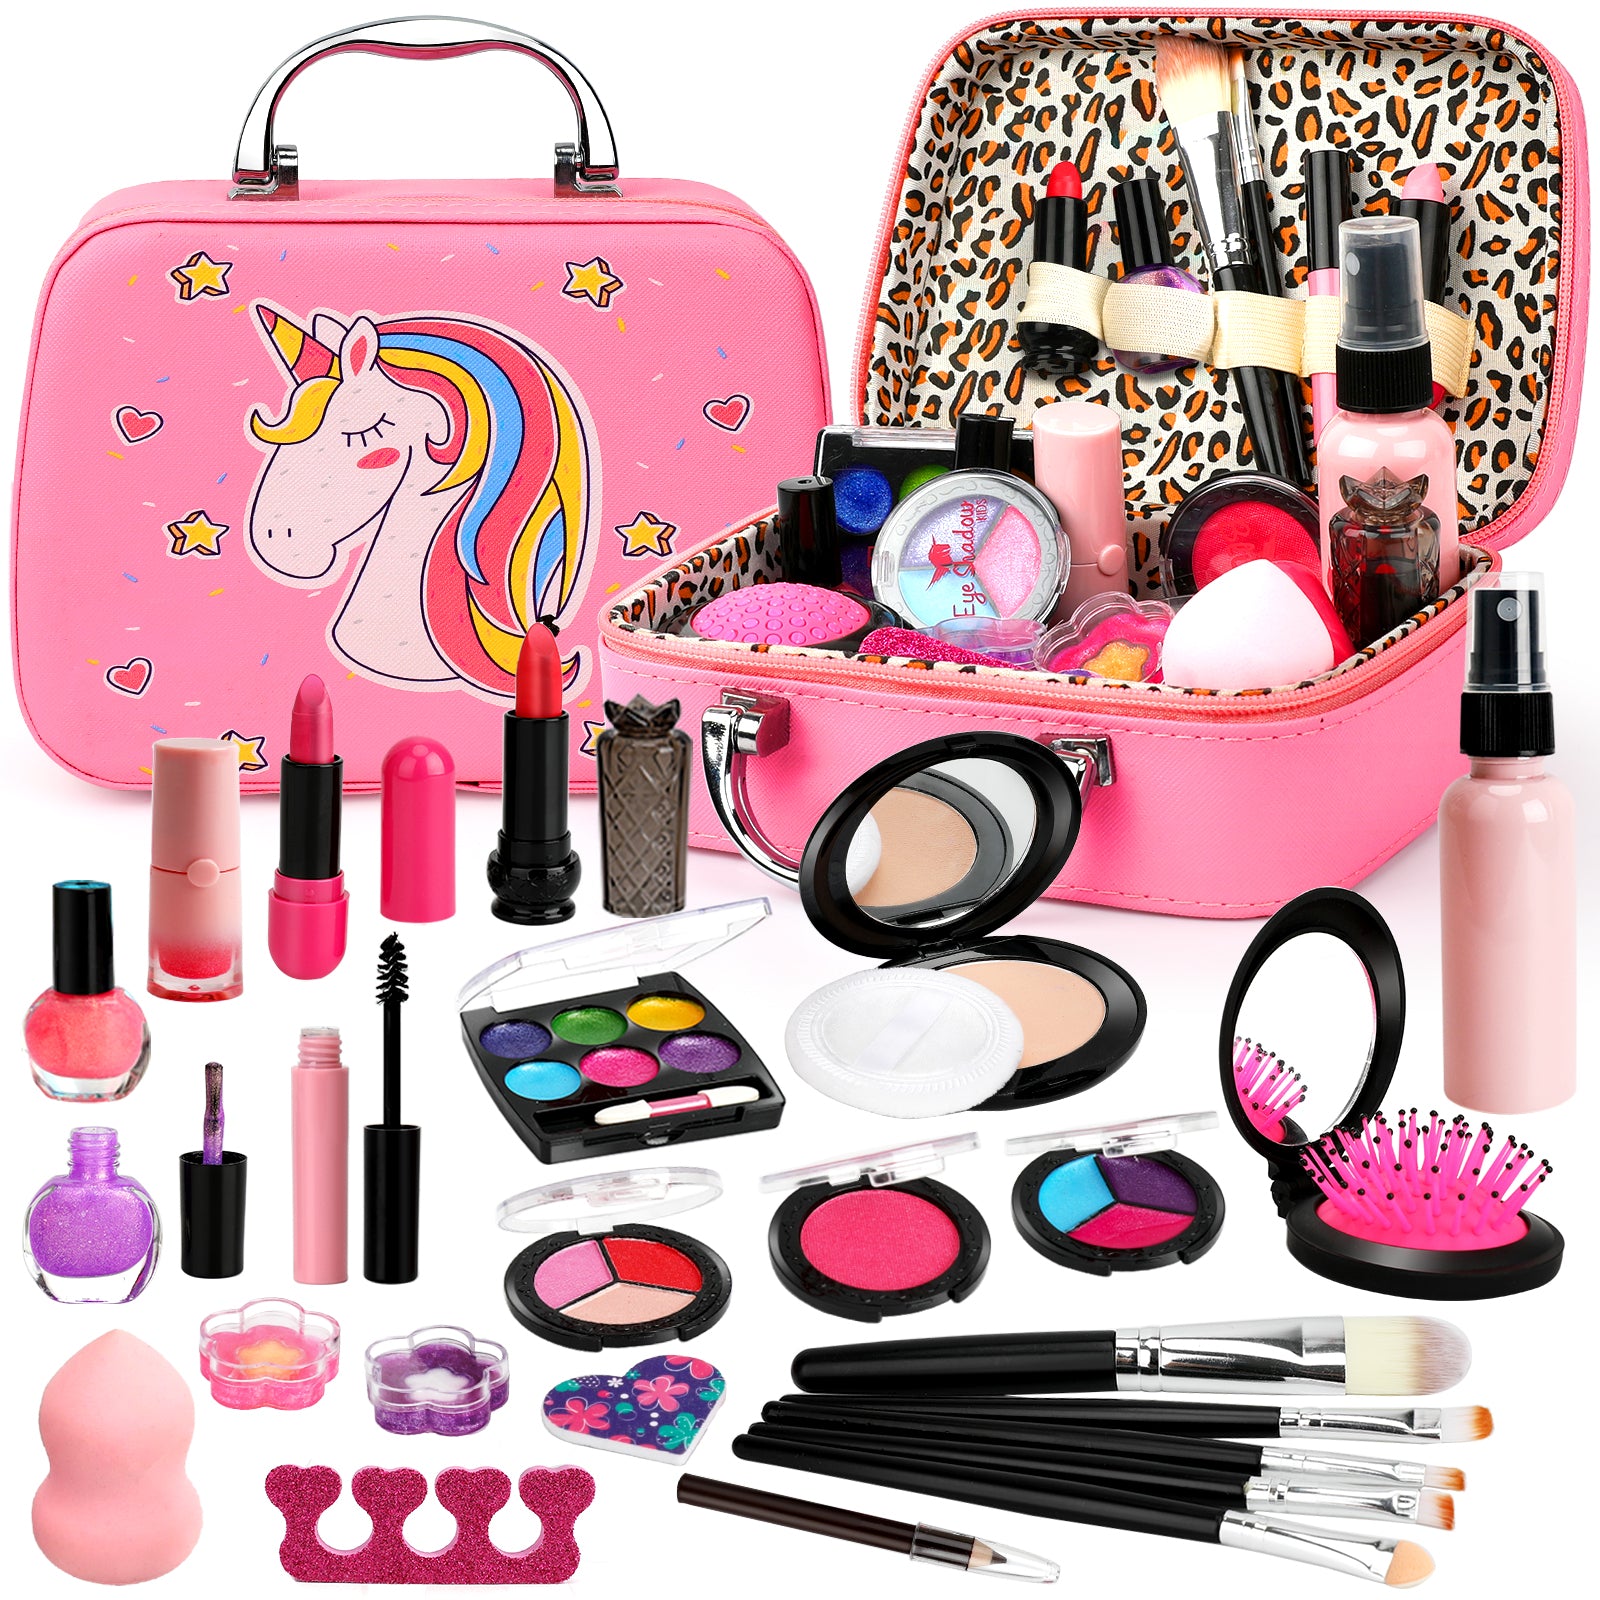 Kids Makeup Palette for Girl Real Washable Kids Makeup - My First Princess Make Up Set Include 4 Blushes, 8 Eyeshadows, 6 Lip Glosses